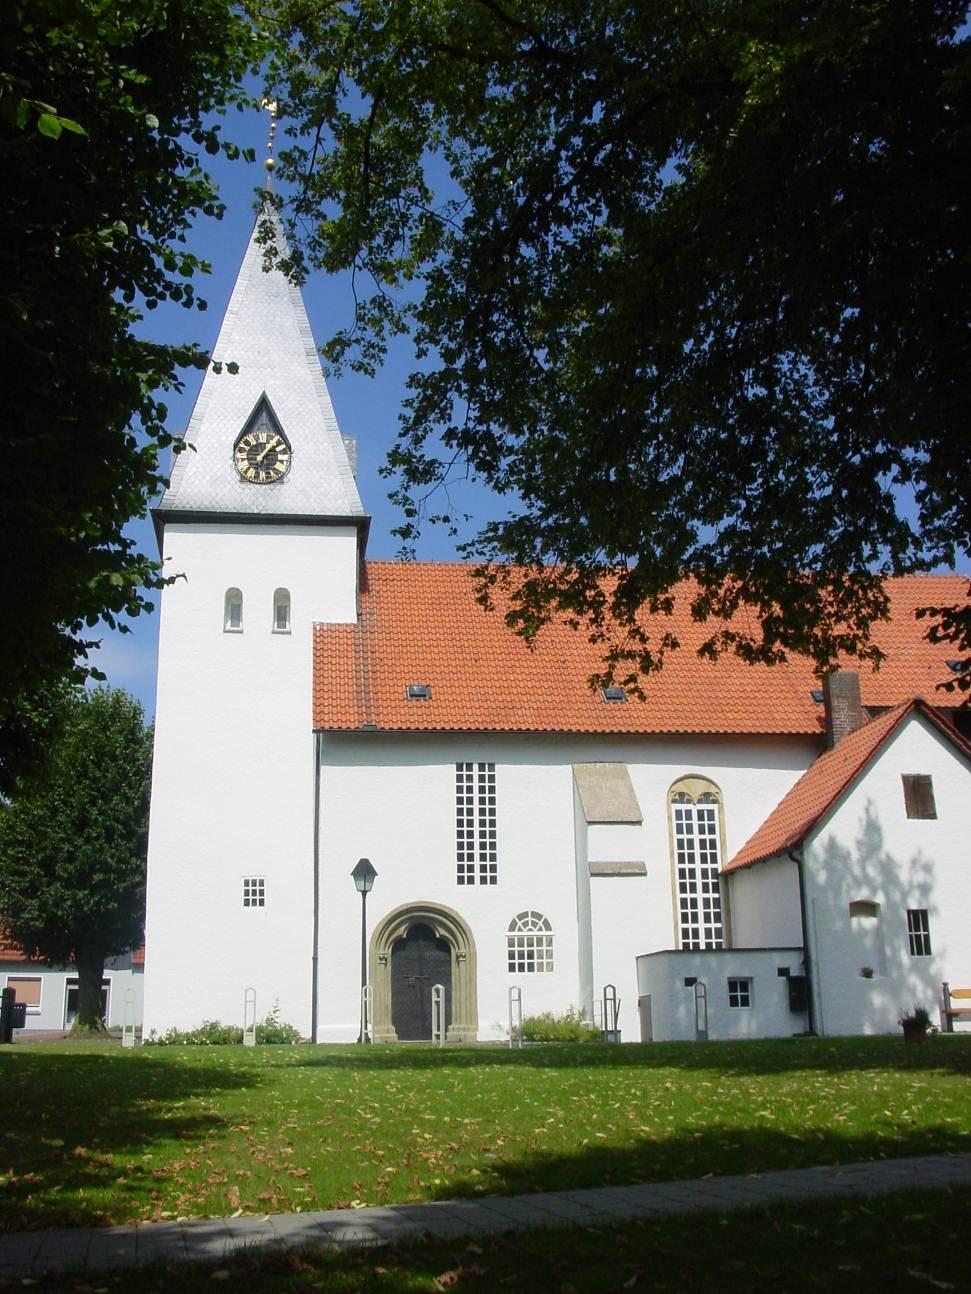 Church of Oldendorf, the neighboring town 3 miles west of Buer.